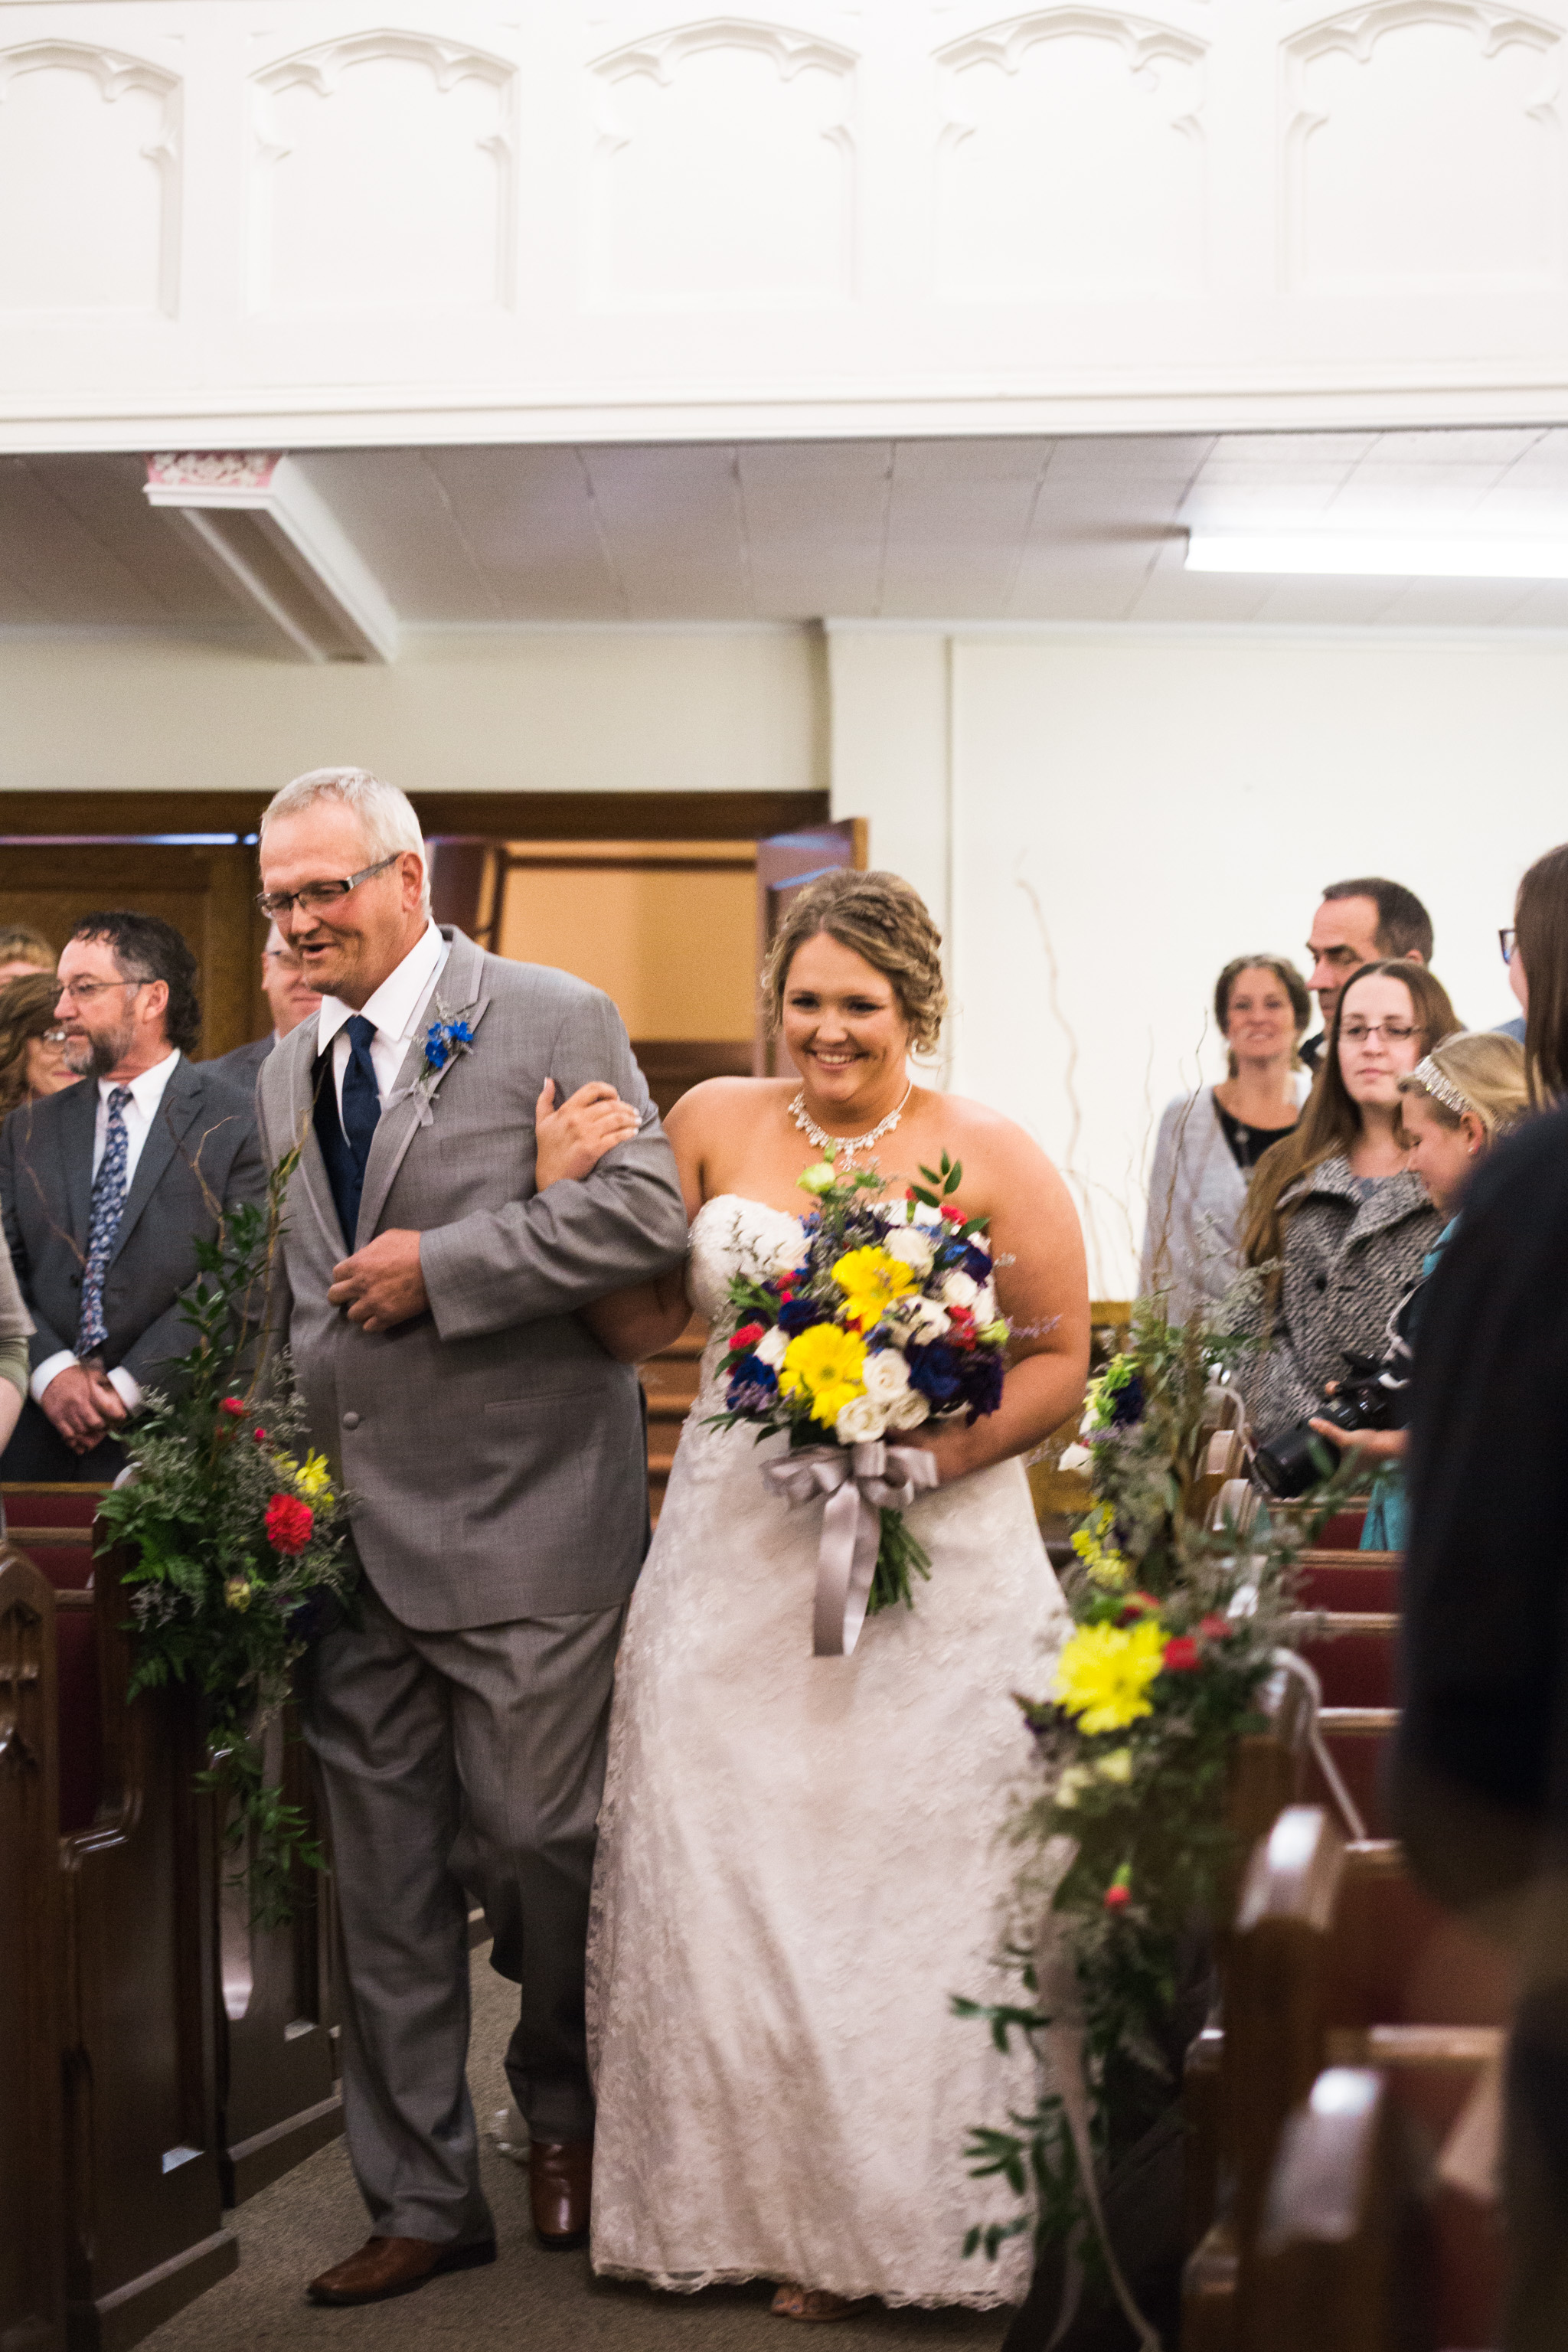 Zibell Spring Wedding, Bride and Groom, Powerful, Connected, Exploration, Laura Duggleby Photography -122.JPG